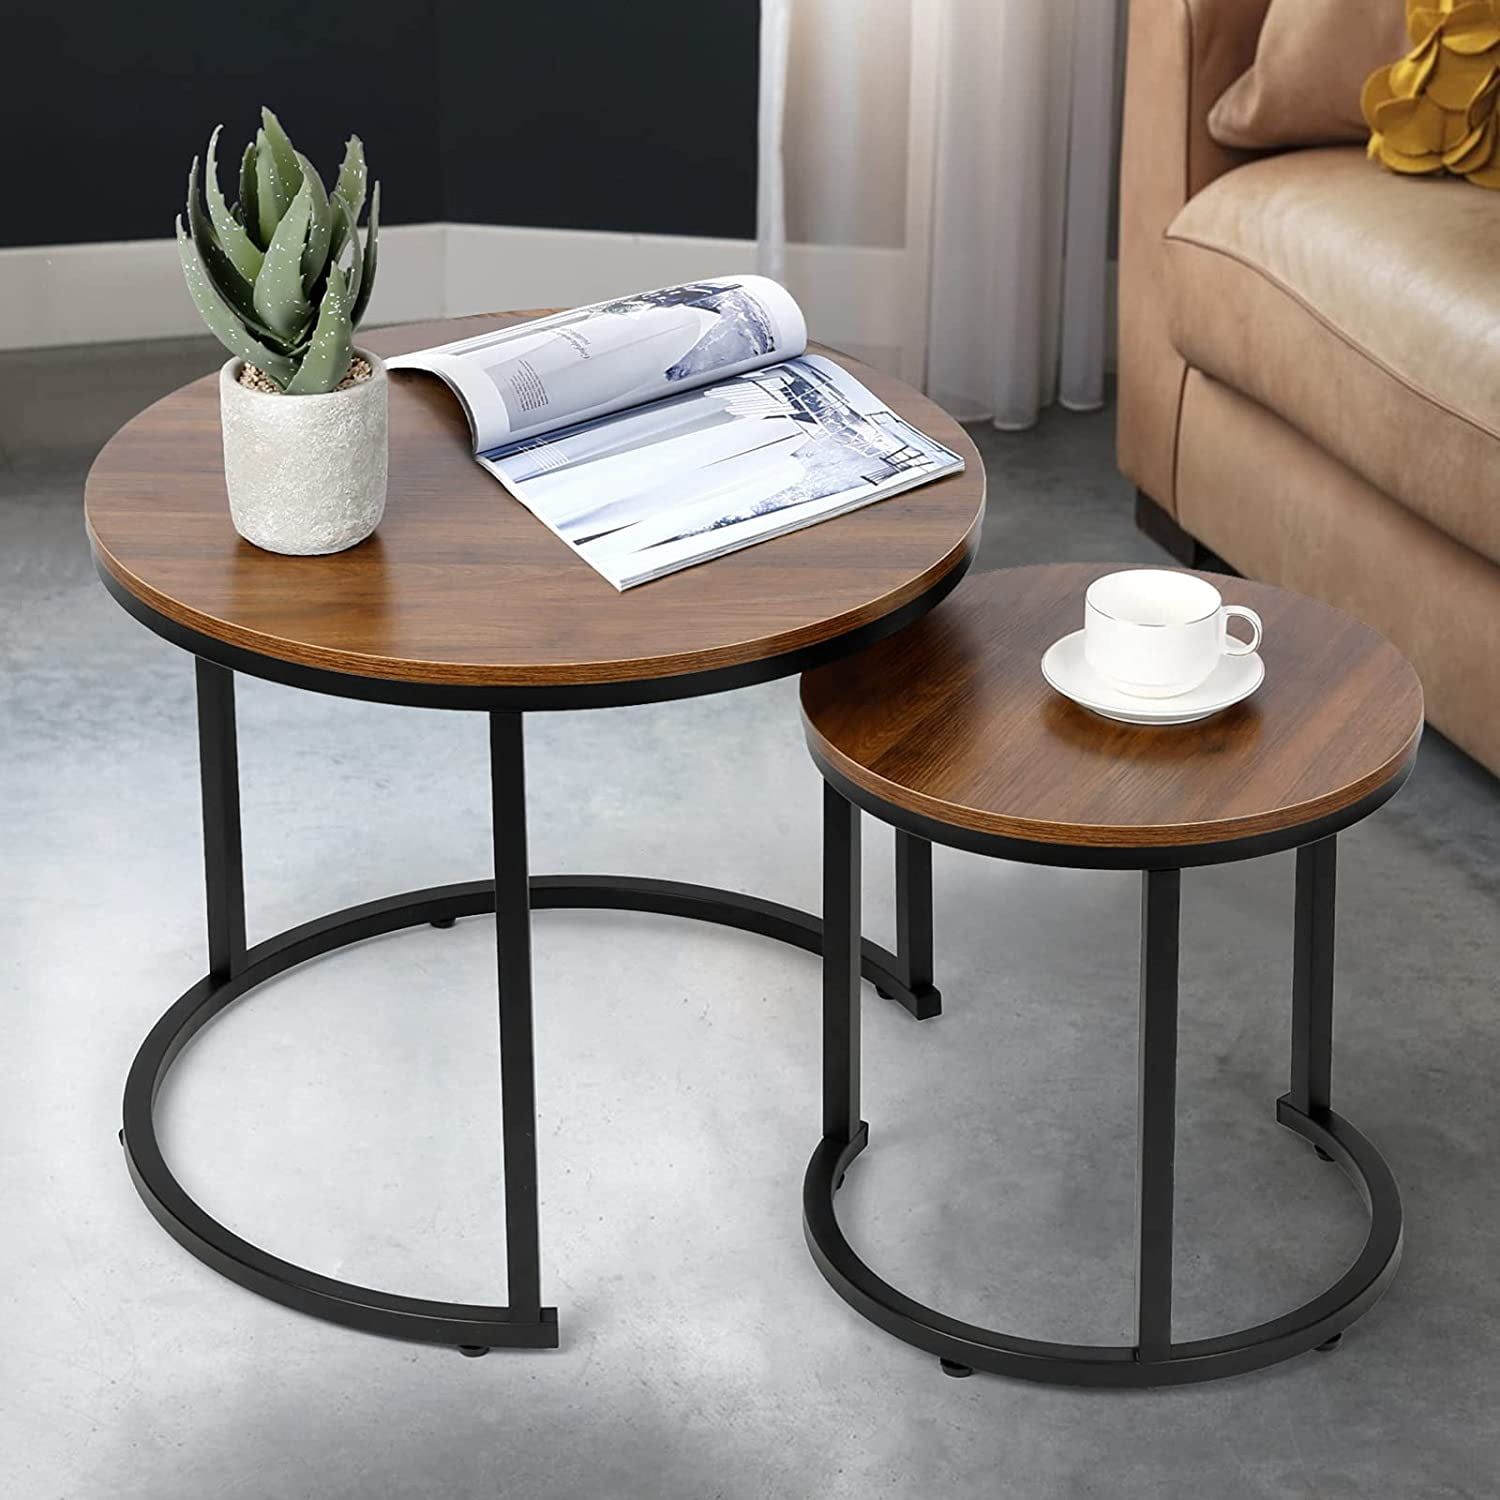 Amzdeal Modern Nesting Coffee Tables, Walnut Round Top, Set Of 2, Brown With Regard To Nesting Coffee Tables (View 6 of 20)